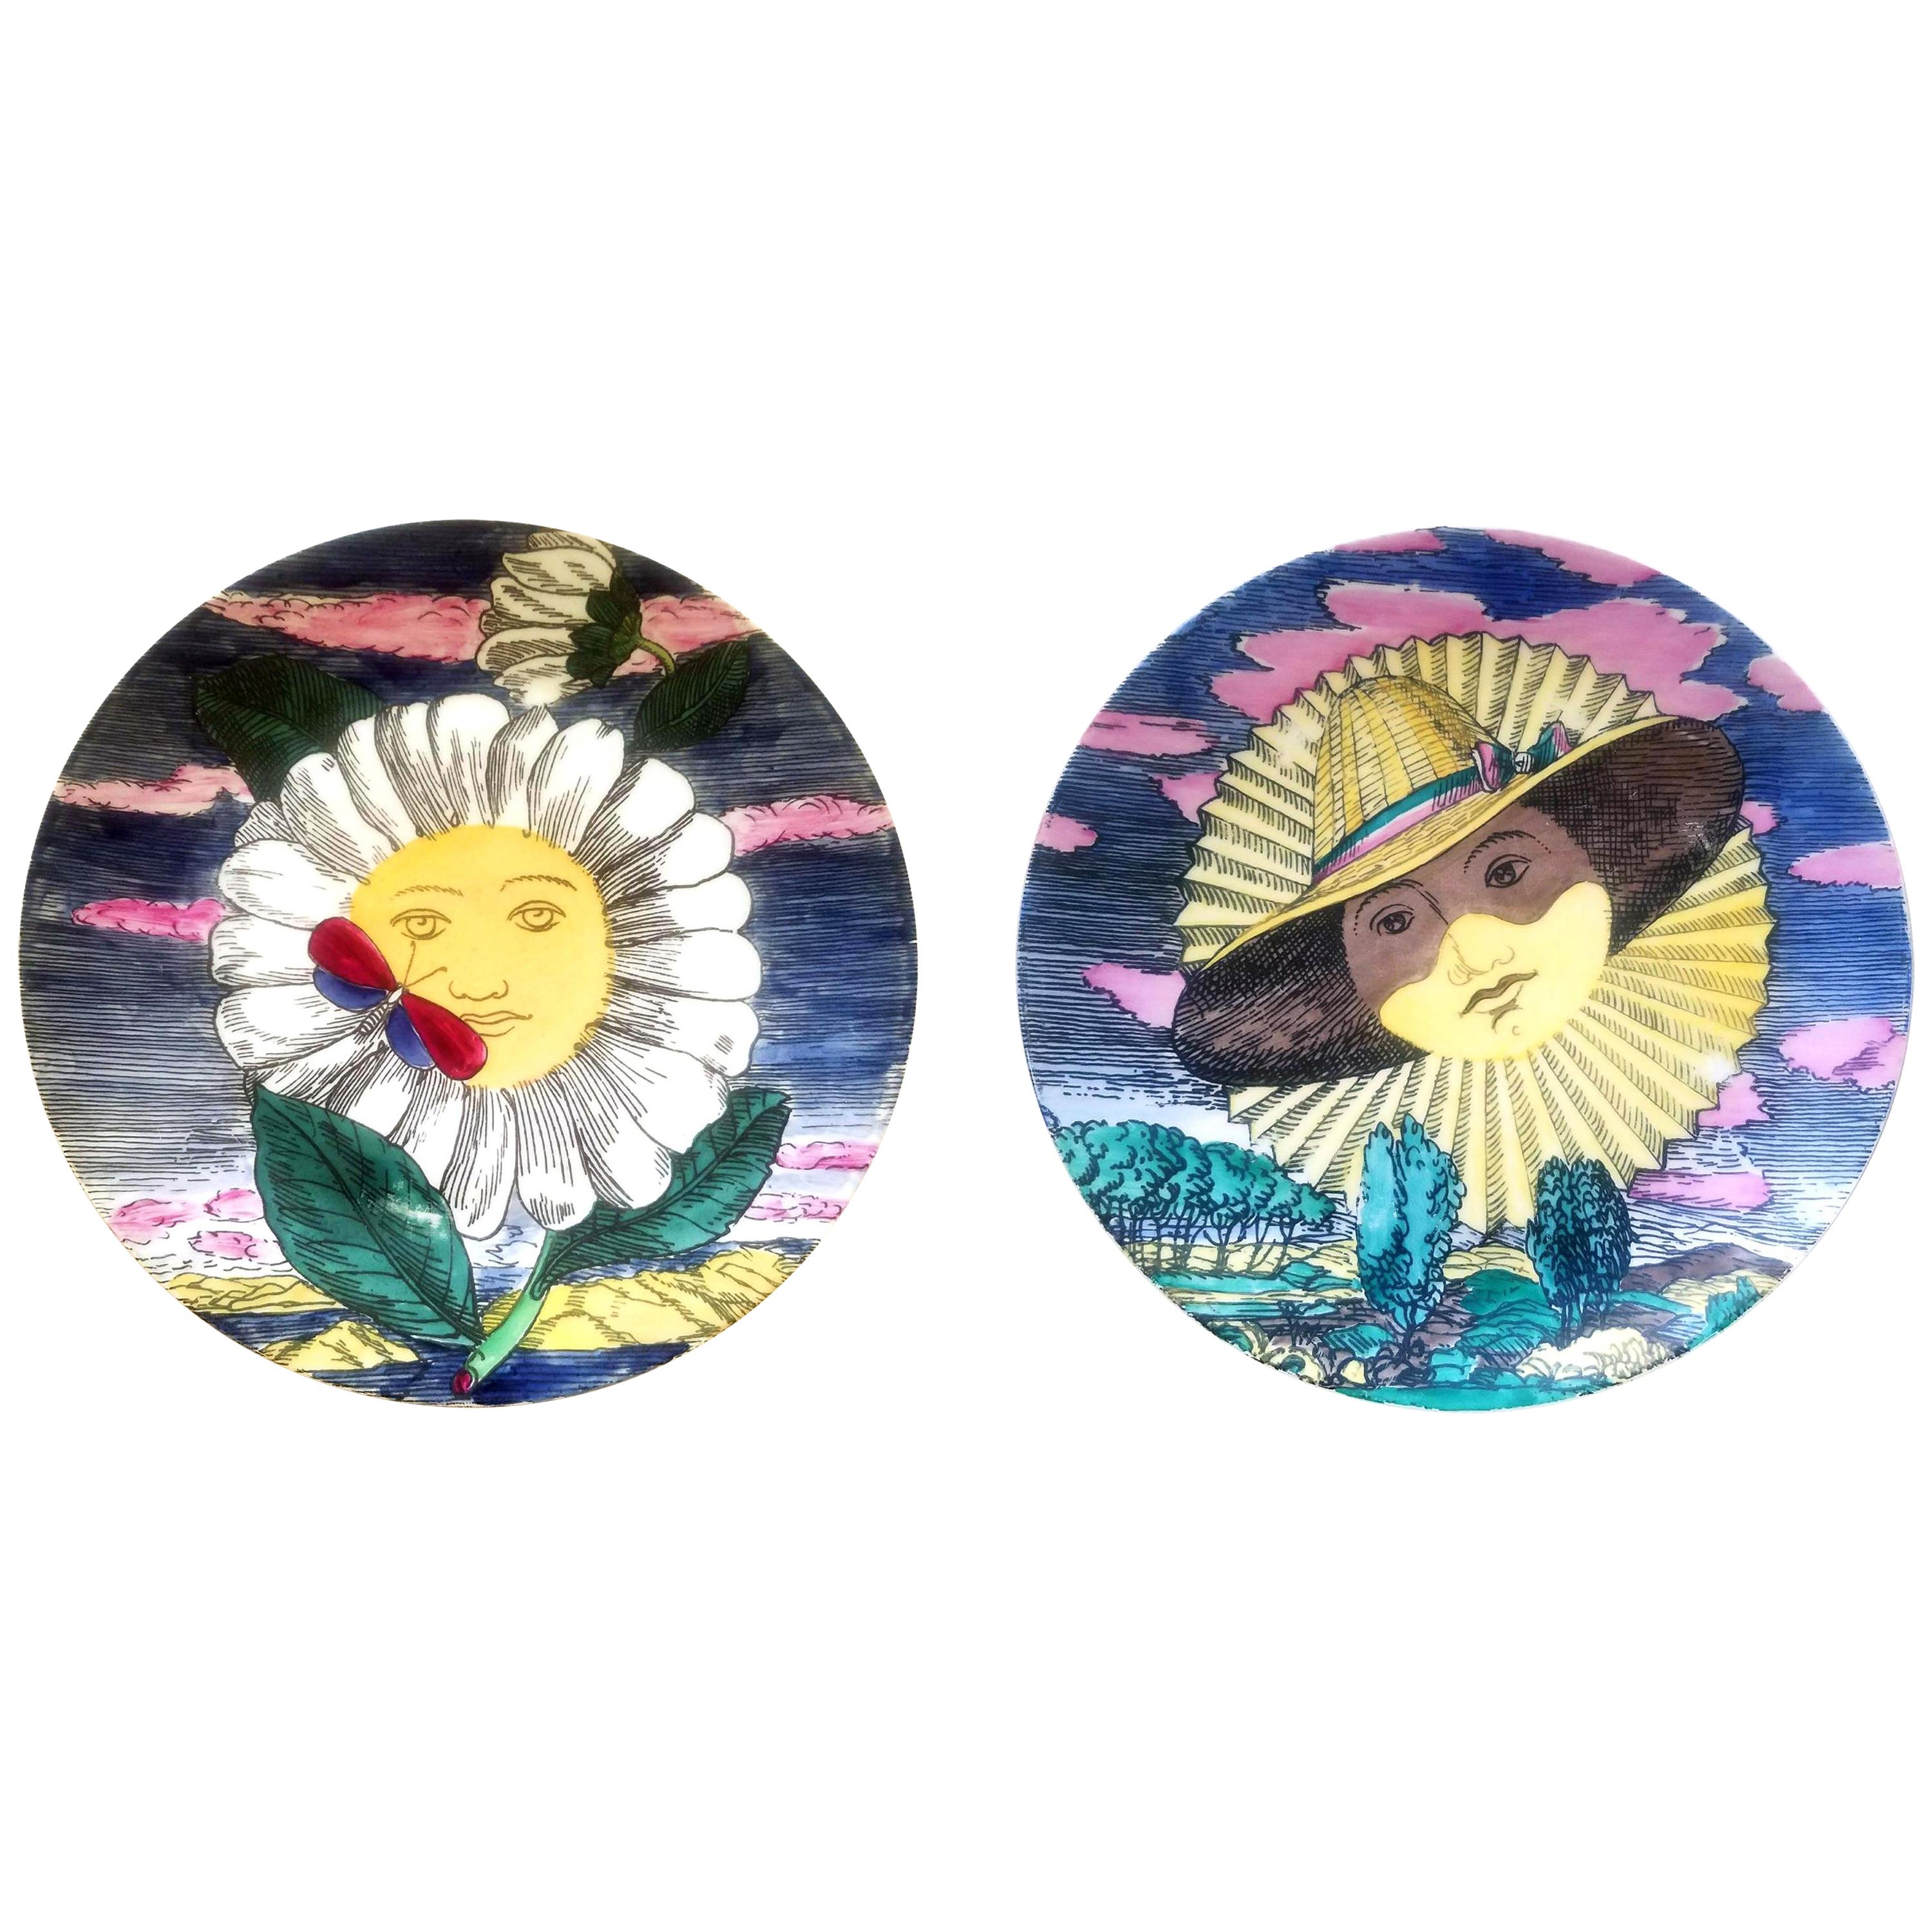 Piero Fornasetti Porcelain Mesi and Soli Pair of Plates 12 Suns 12 Months, 1955